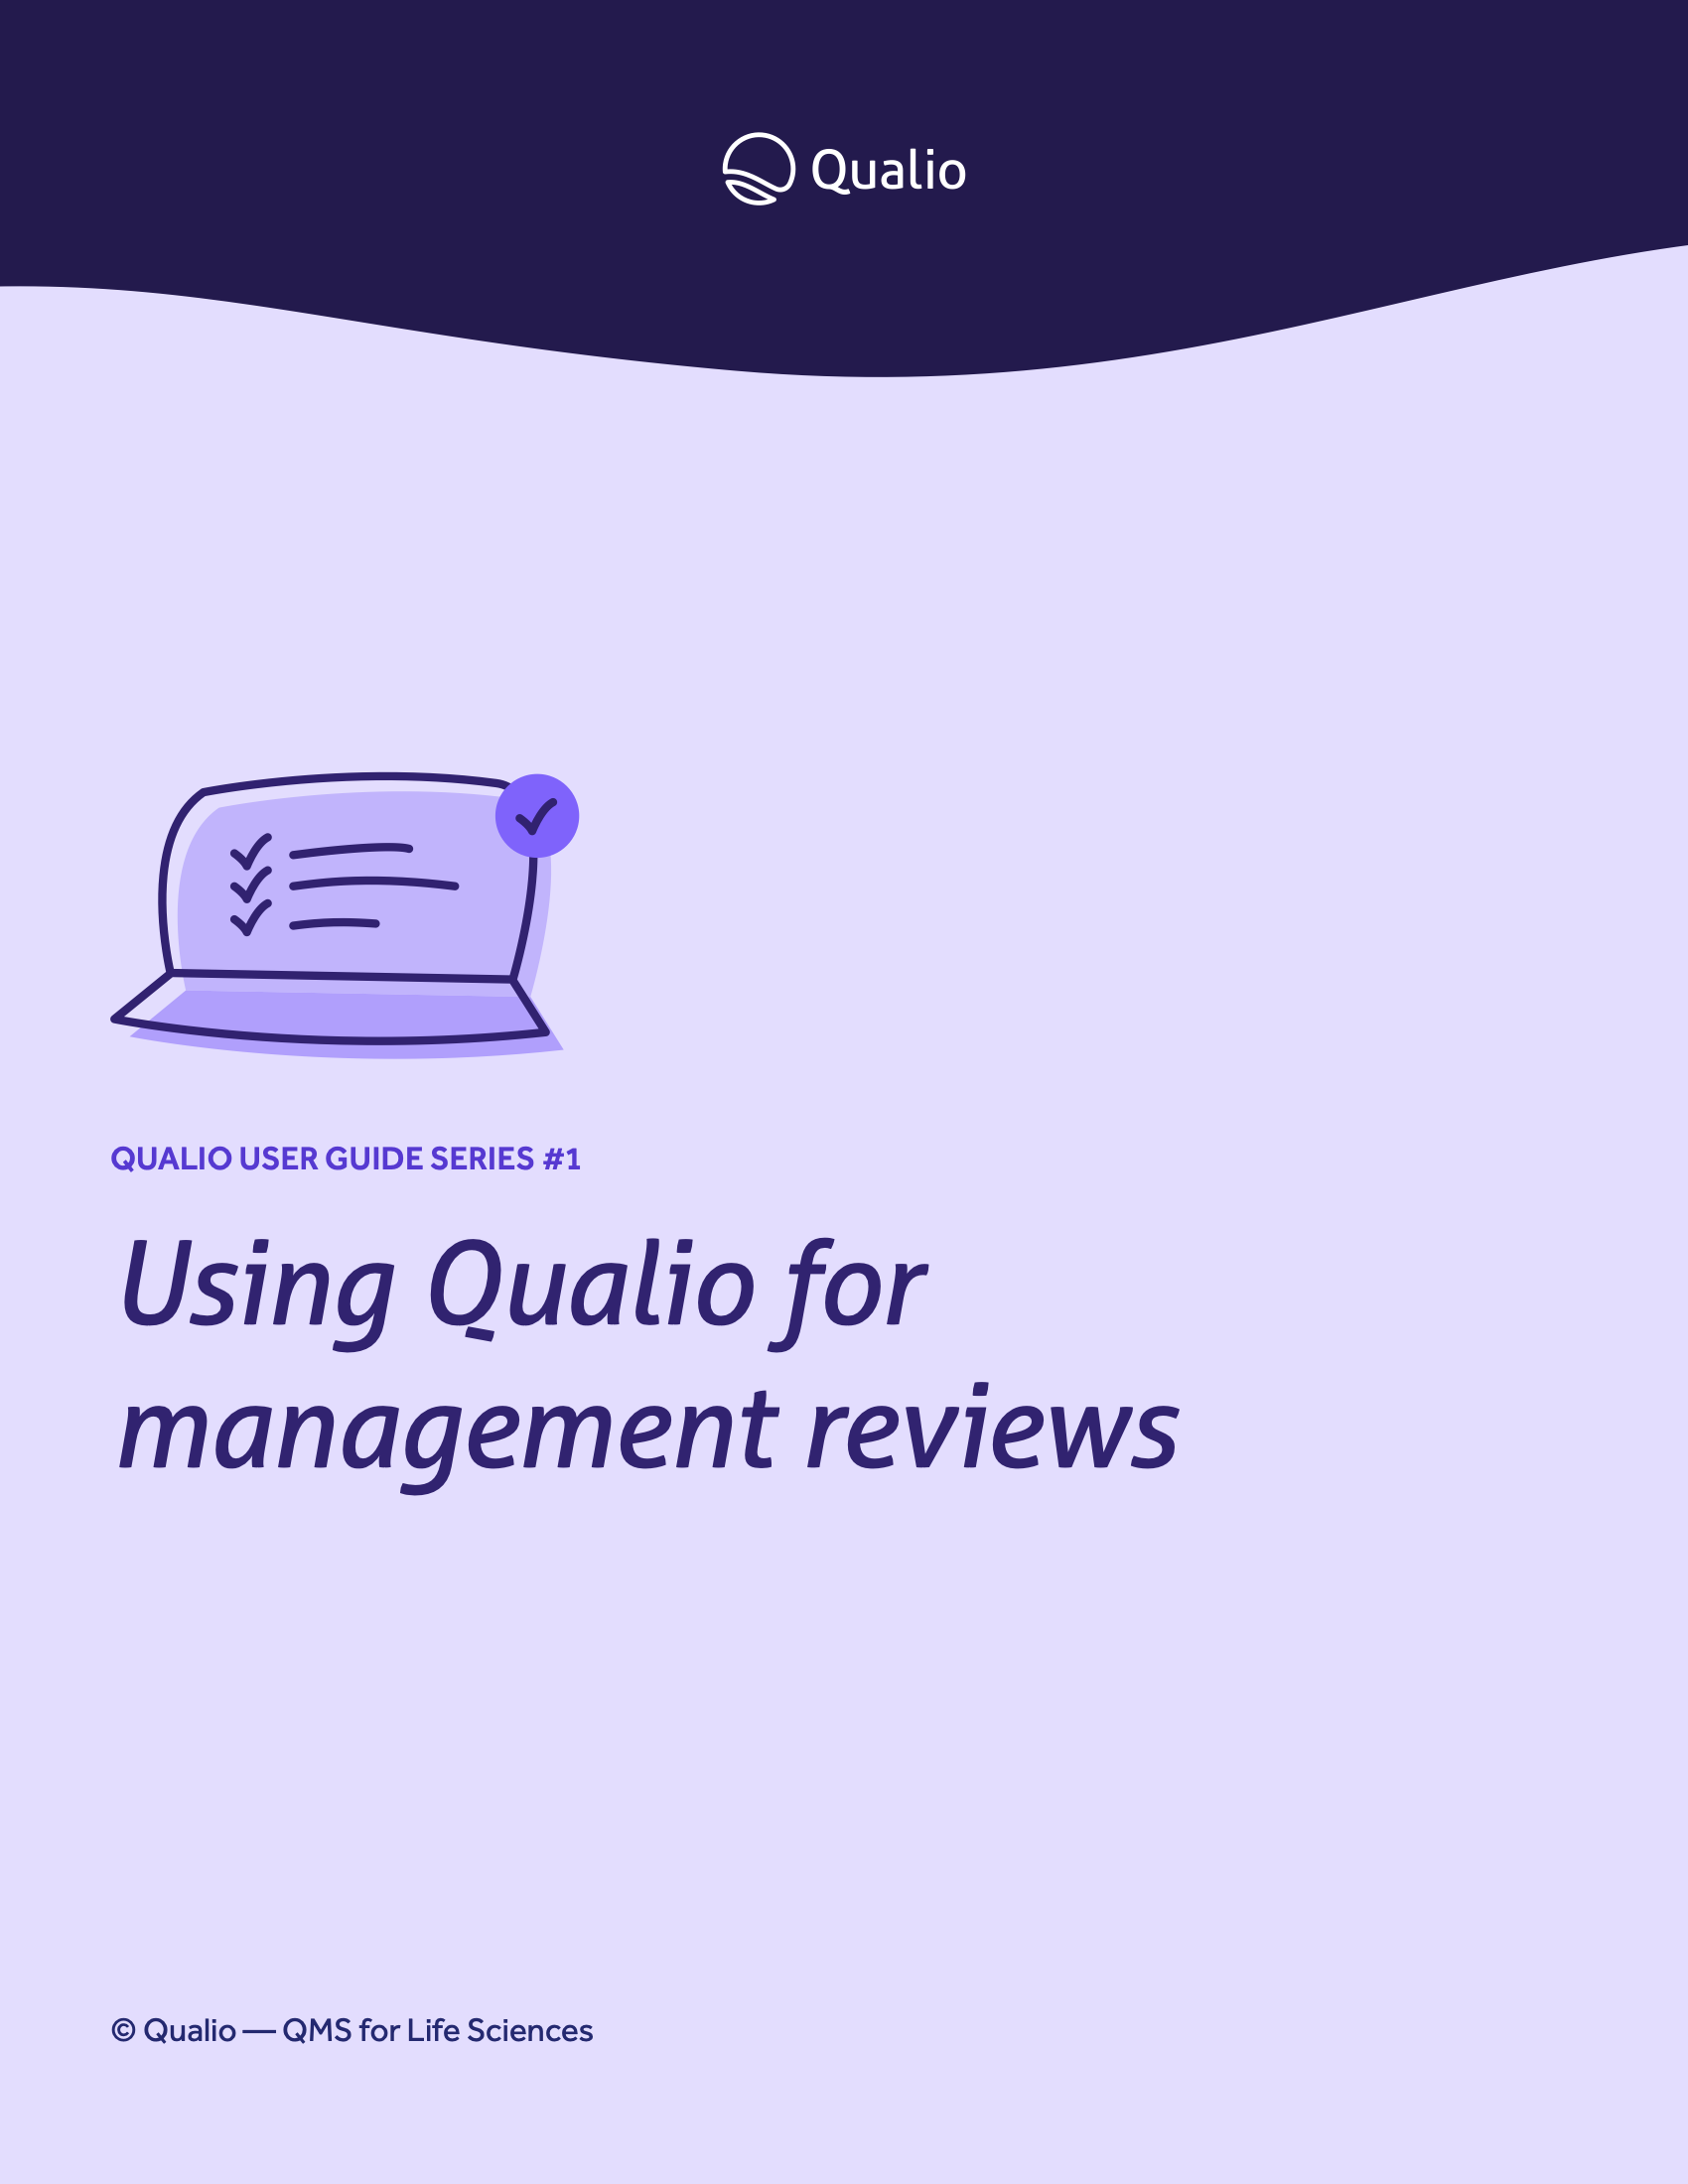 Management review guide